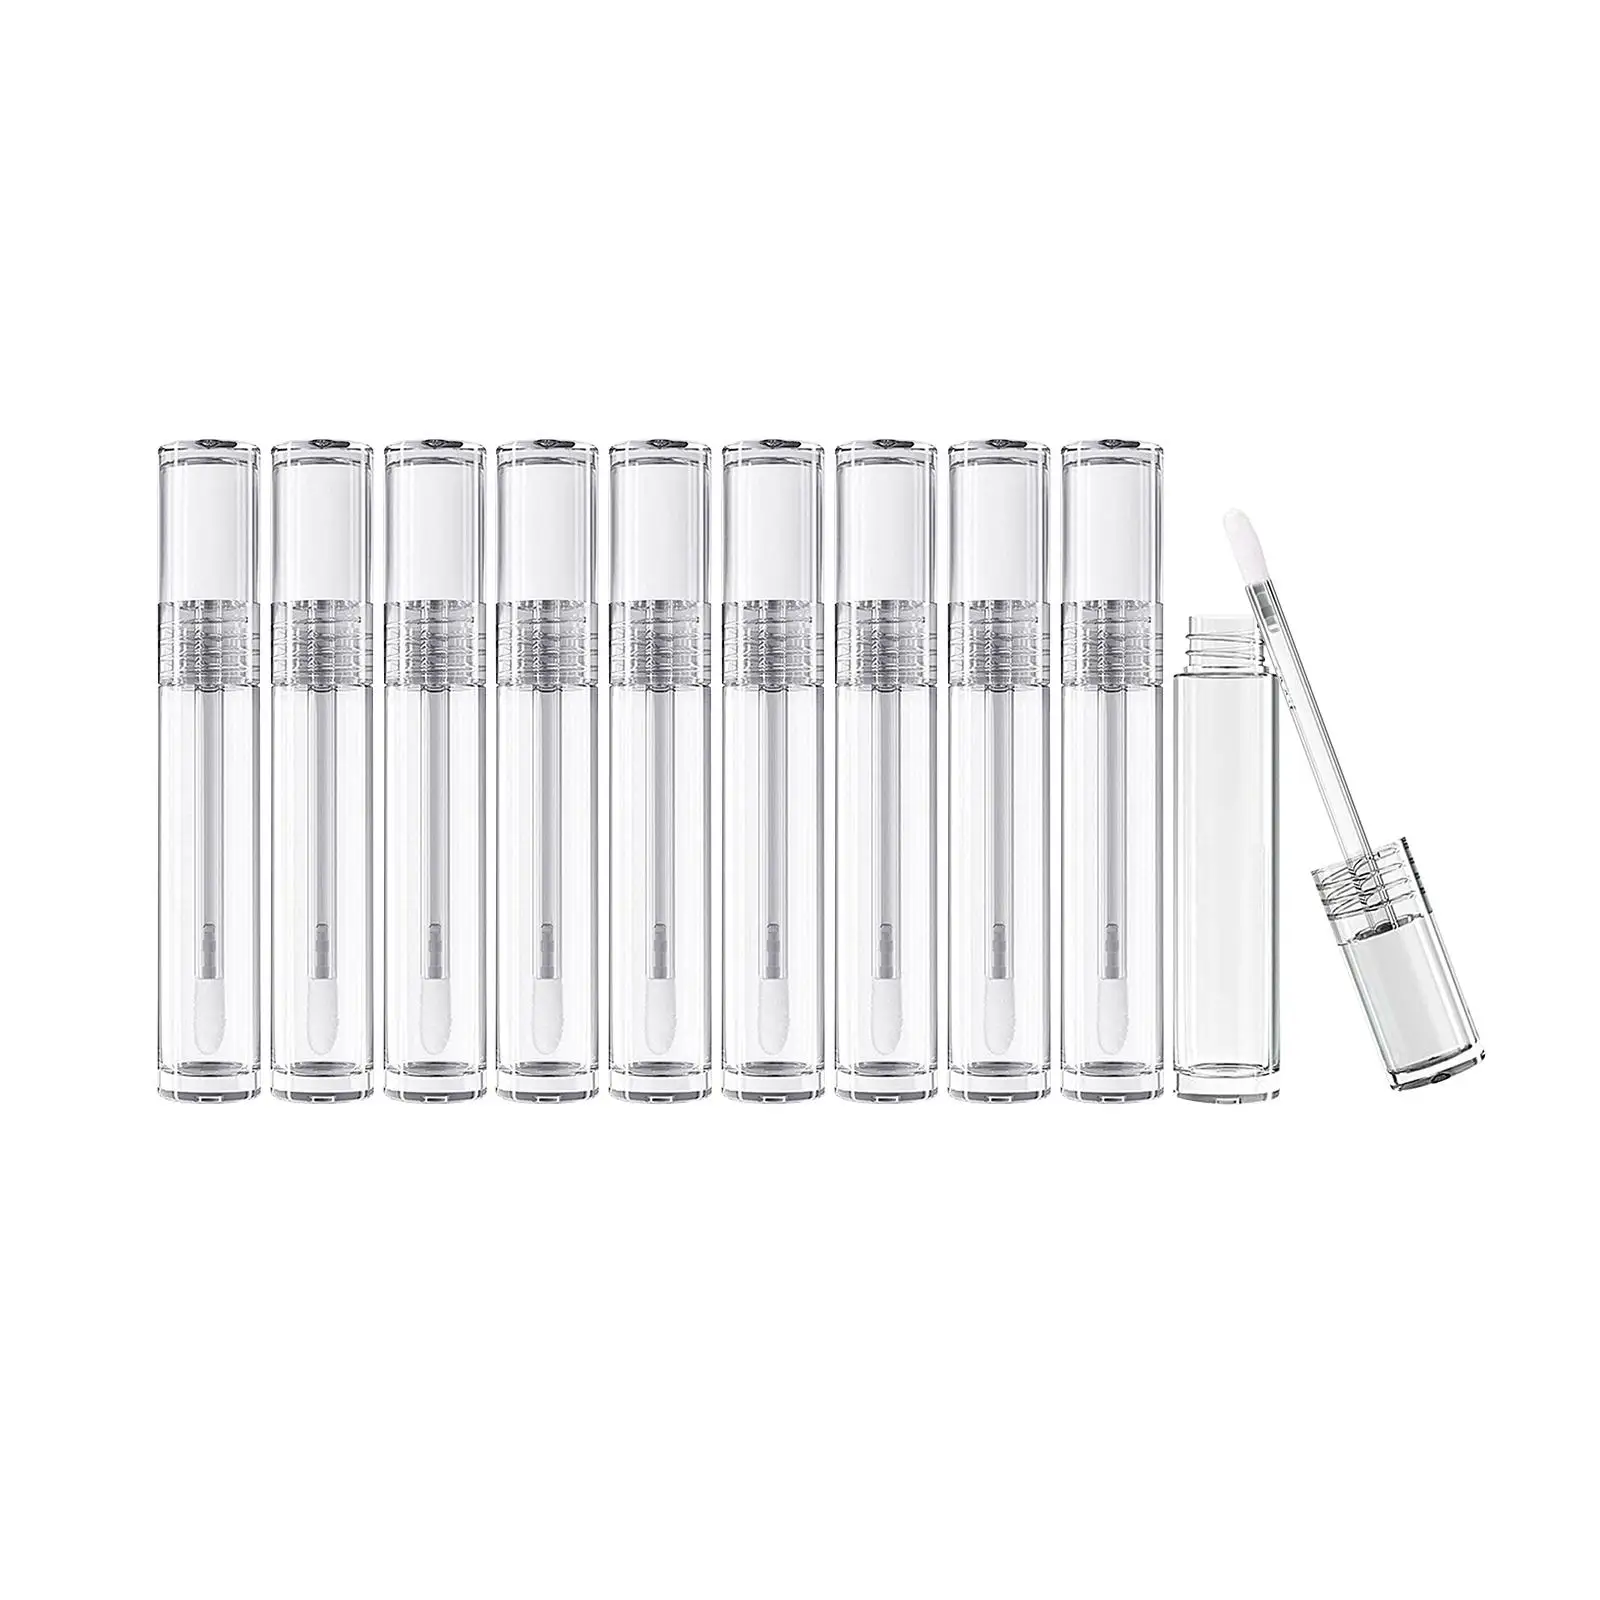 10x Lip Gloss Bottles Refillable Empty Mini Lip Tubes diy cosmetic diy Supplies Cosmetic Bottles Samples Accessories